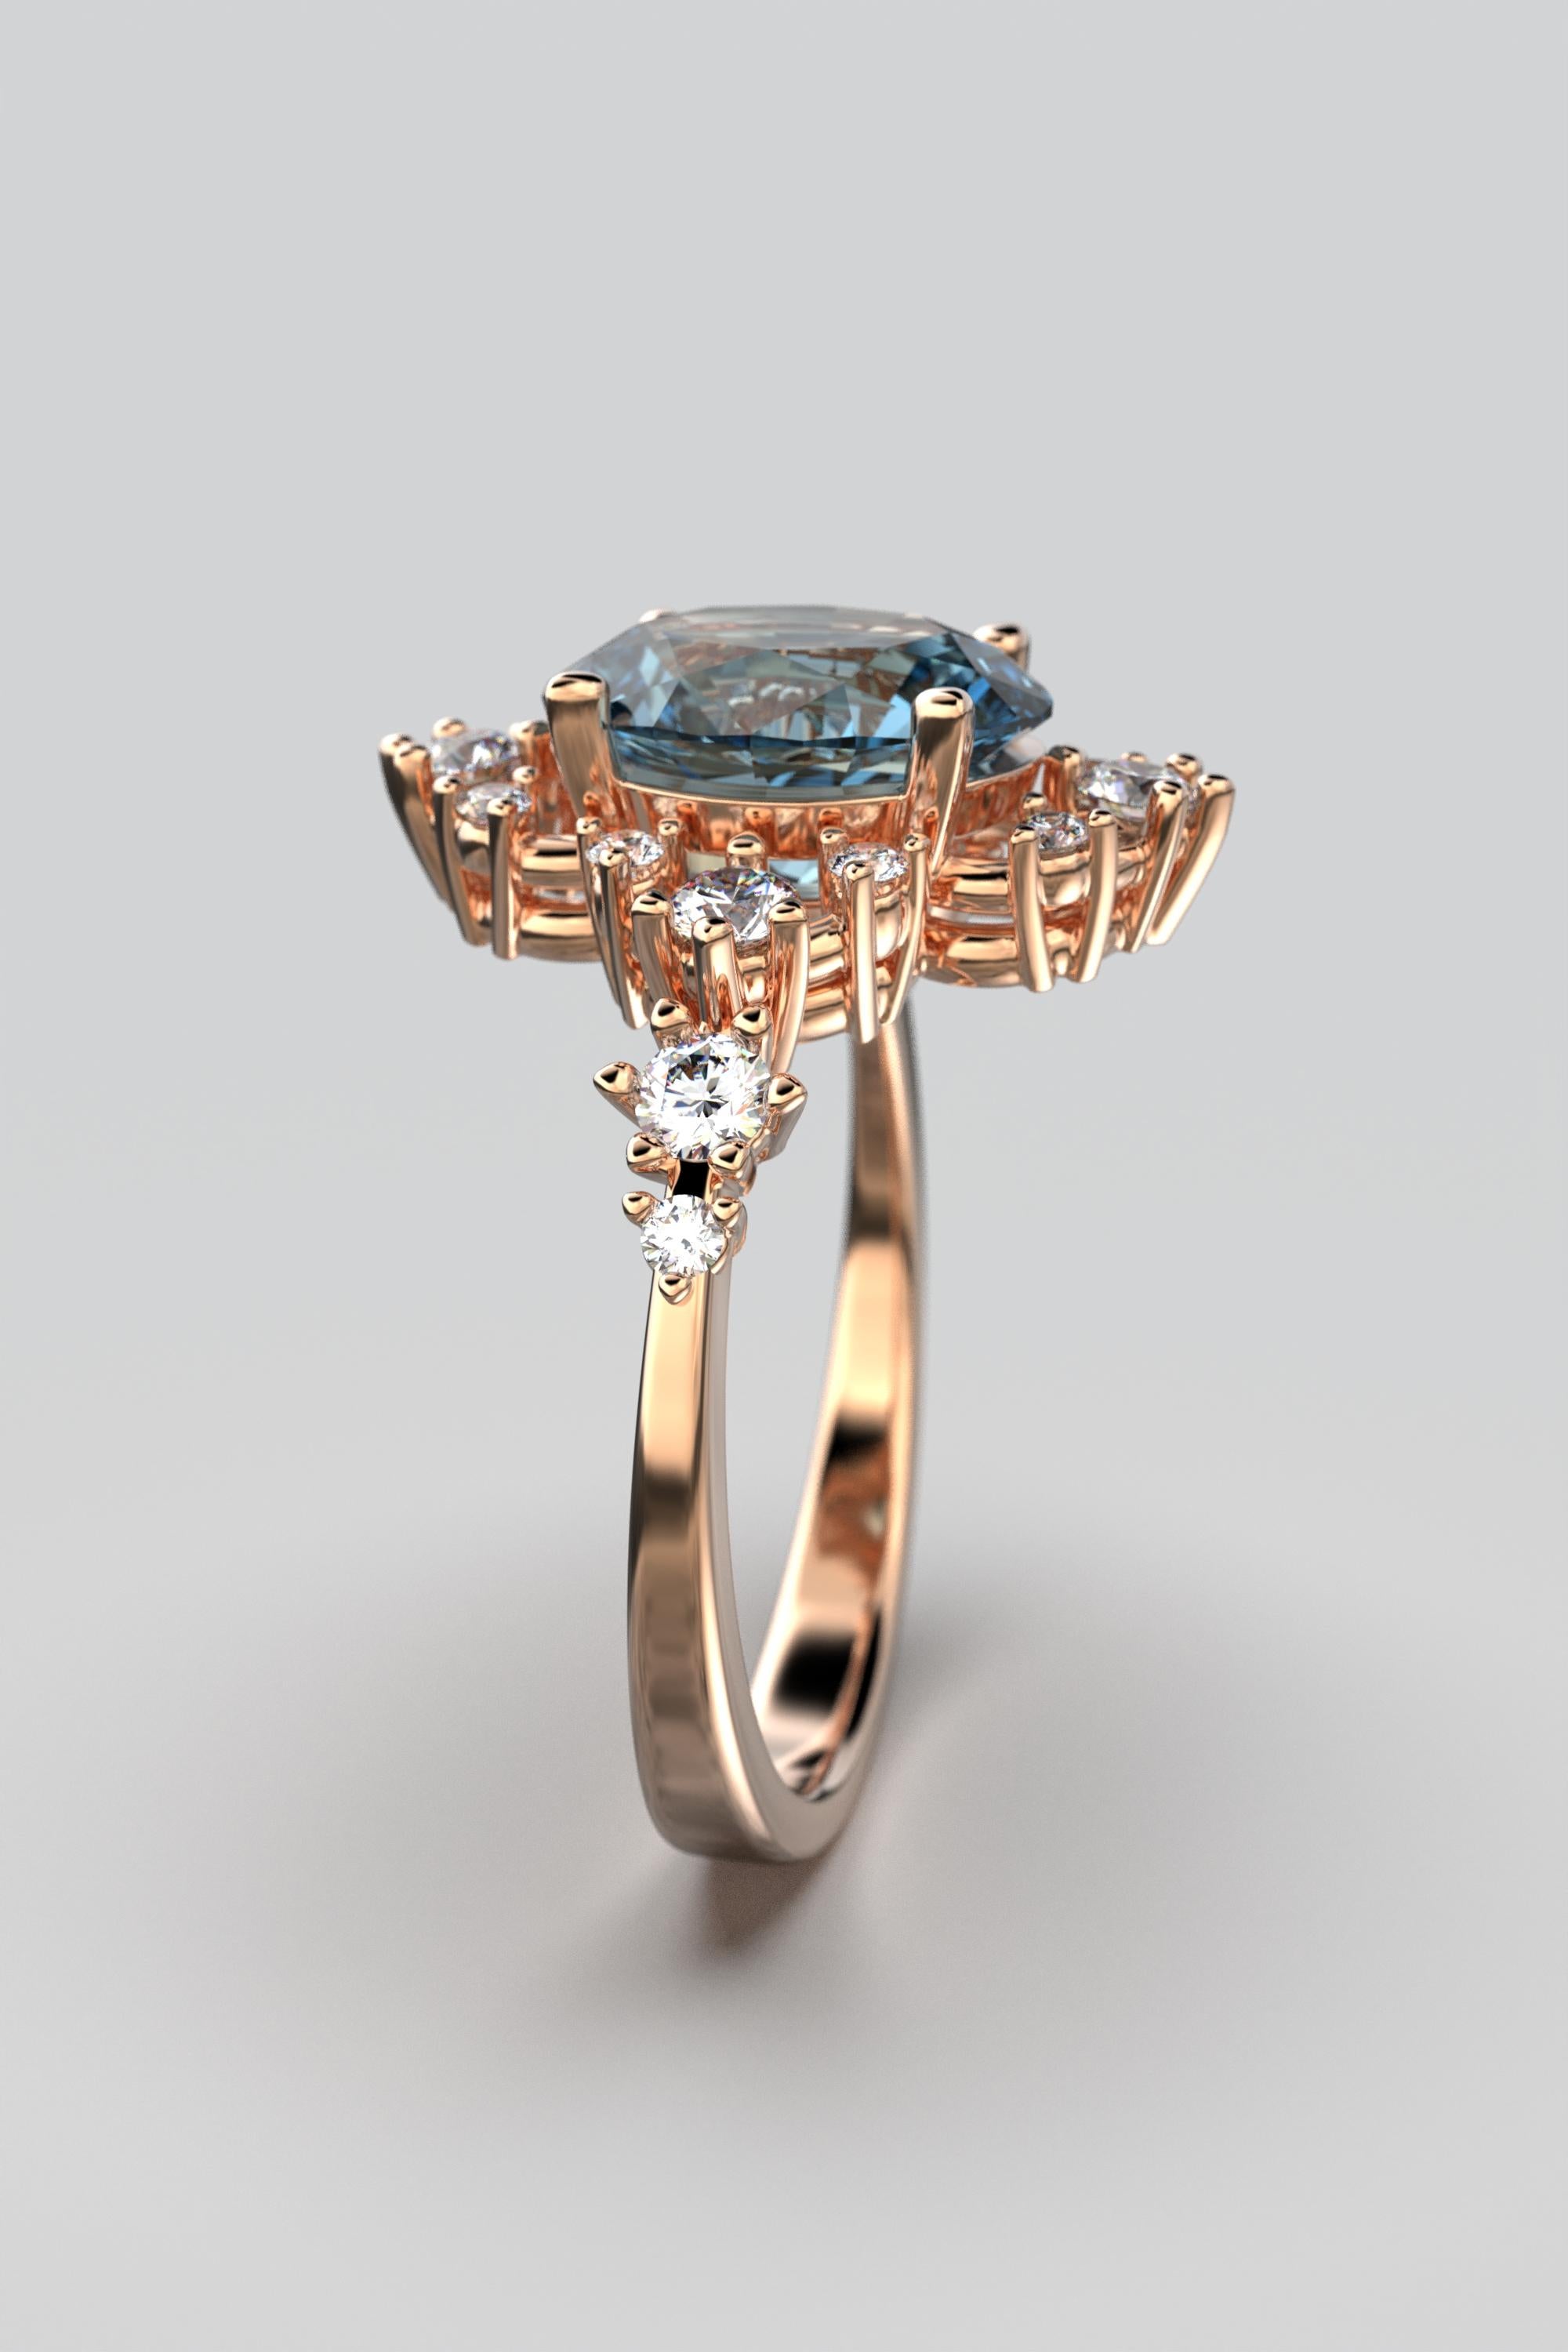 For Sale:  Aquamarine And Diamond Ring Made In Italy in 14k Solid Gold  Only Made to order 9